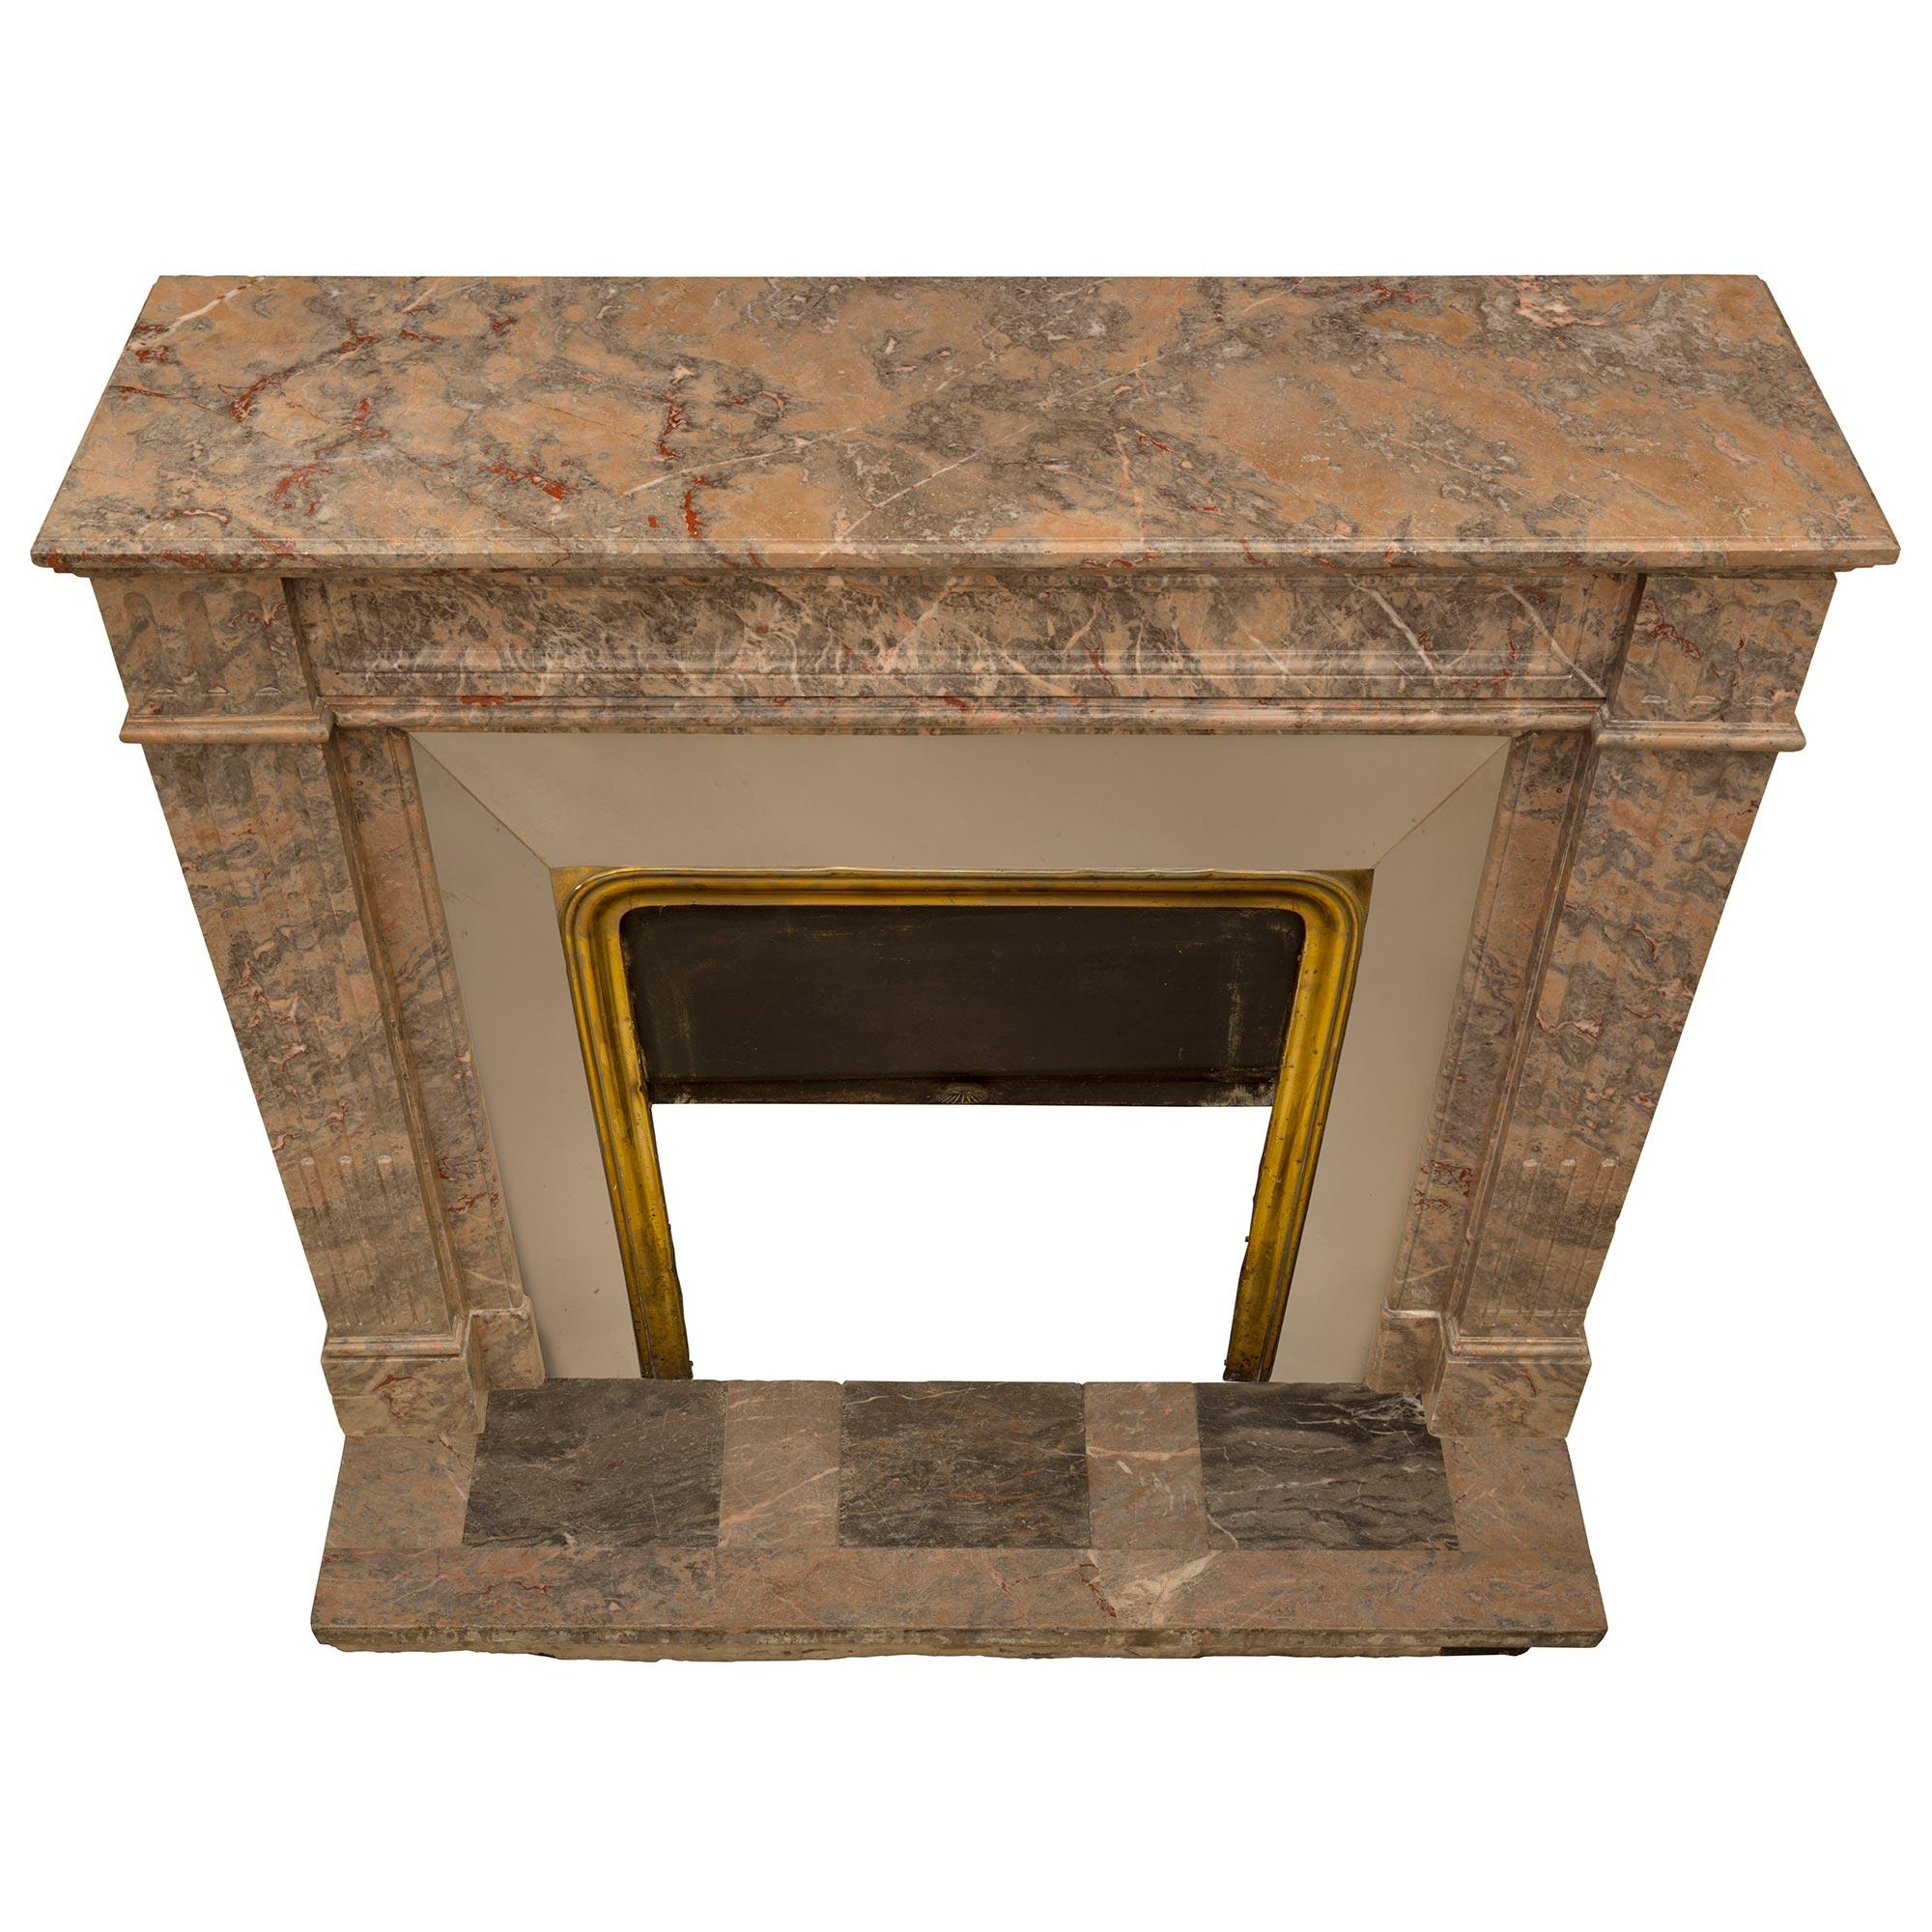 A striking French 19th century Louis XVI st. Sarrancolin and Gris St. Anne marble fireplace mantel. The mantel retains its original rectangular plinth with three square 'Gris St. Anne' marble inserts and its original brass and iron interior with